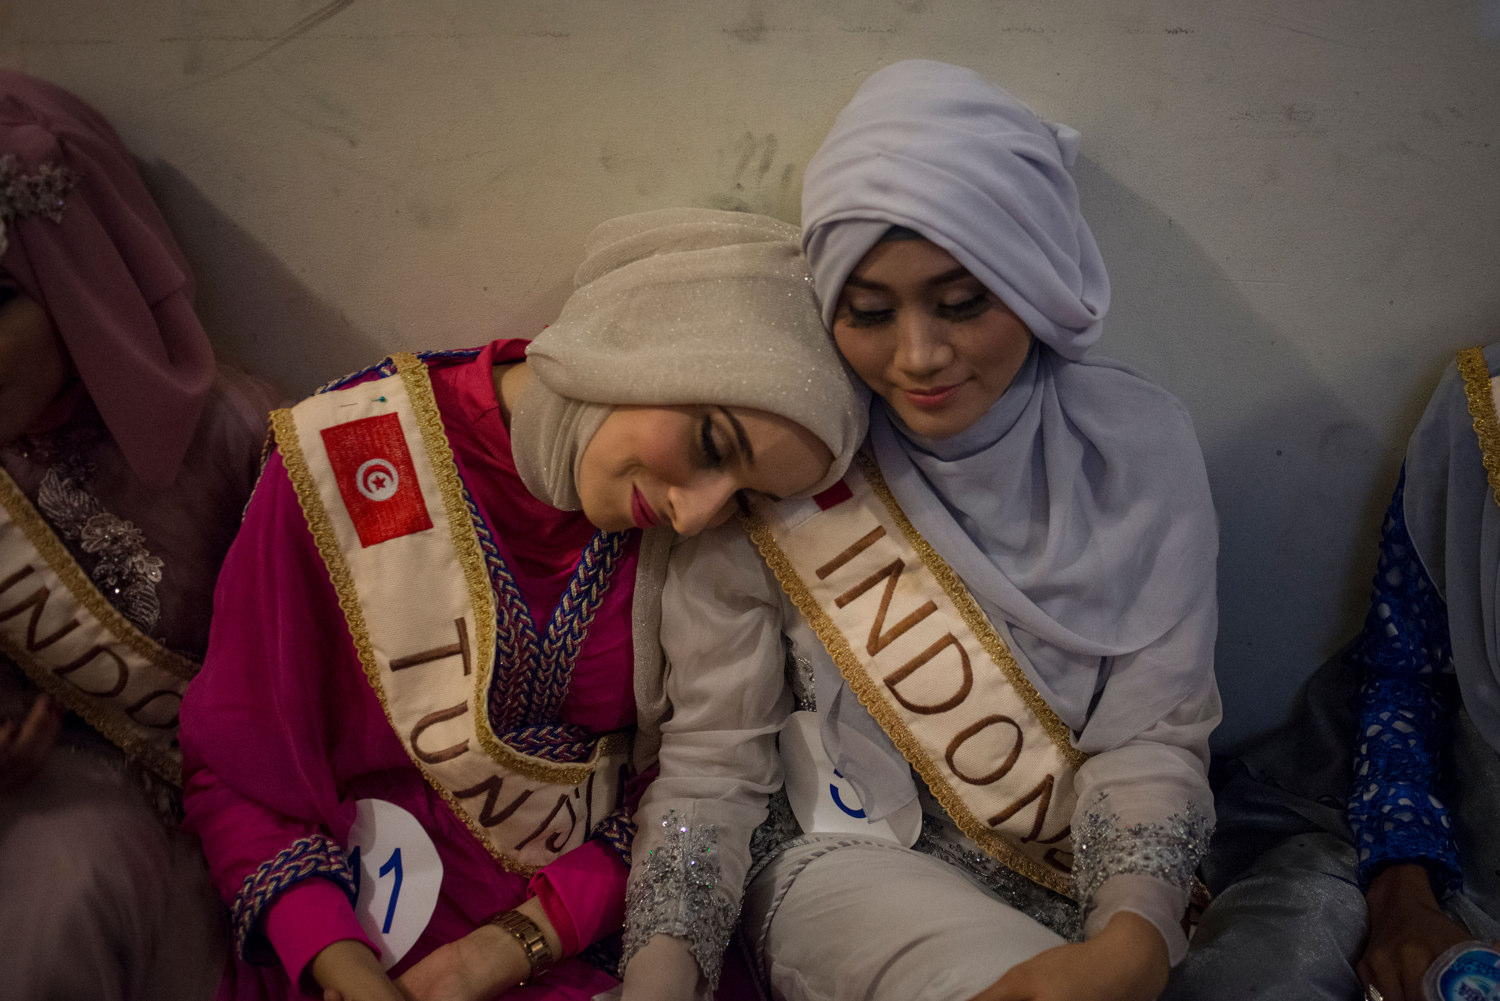  At The Grand Finale of the Miss Muslimah World Competition, backstage the girls are anxious and exhausted on November 21st, 2014 in Yogakarta, Indonesia. Pictured Muss Tunisia, Fatma Ben Guefrache, and Primadhita Rahma, one of the Indonesian finalis